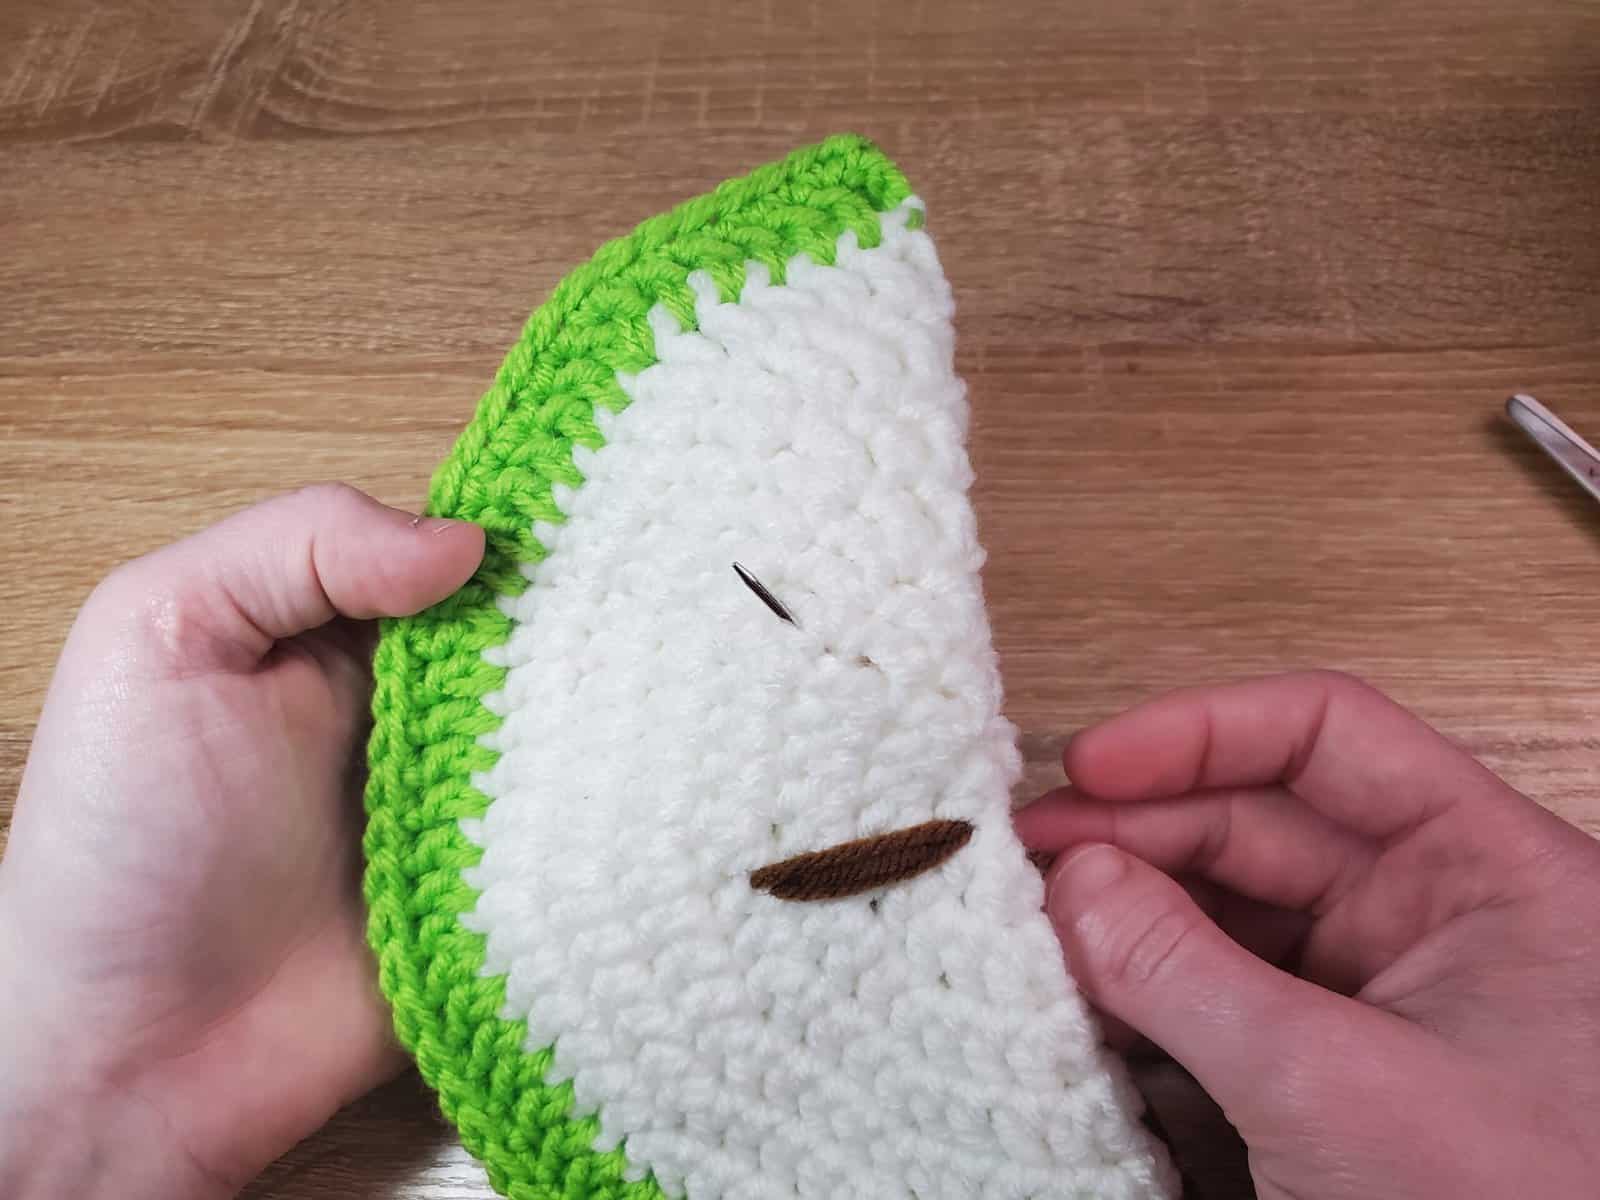 creating the other two stitches to form the seed